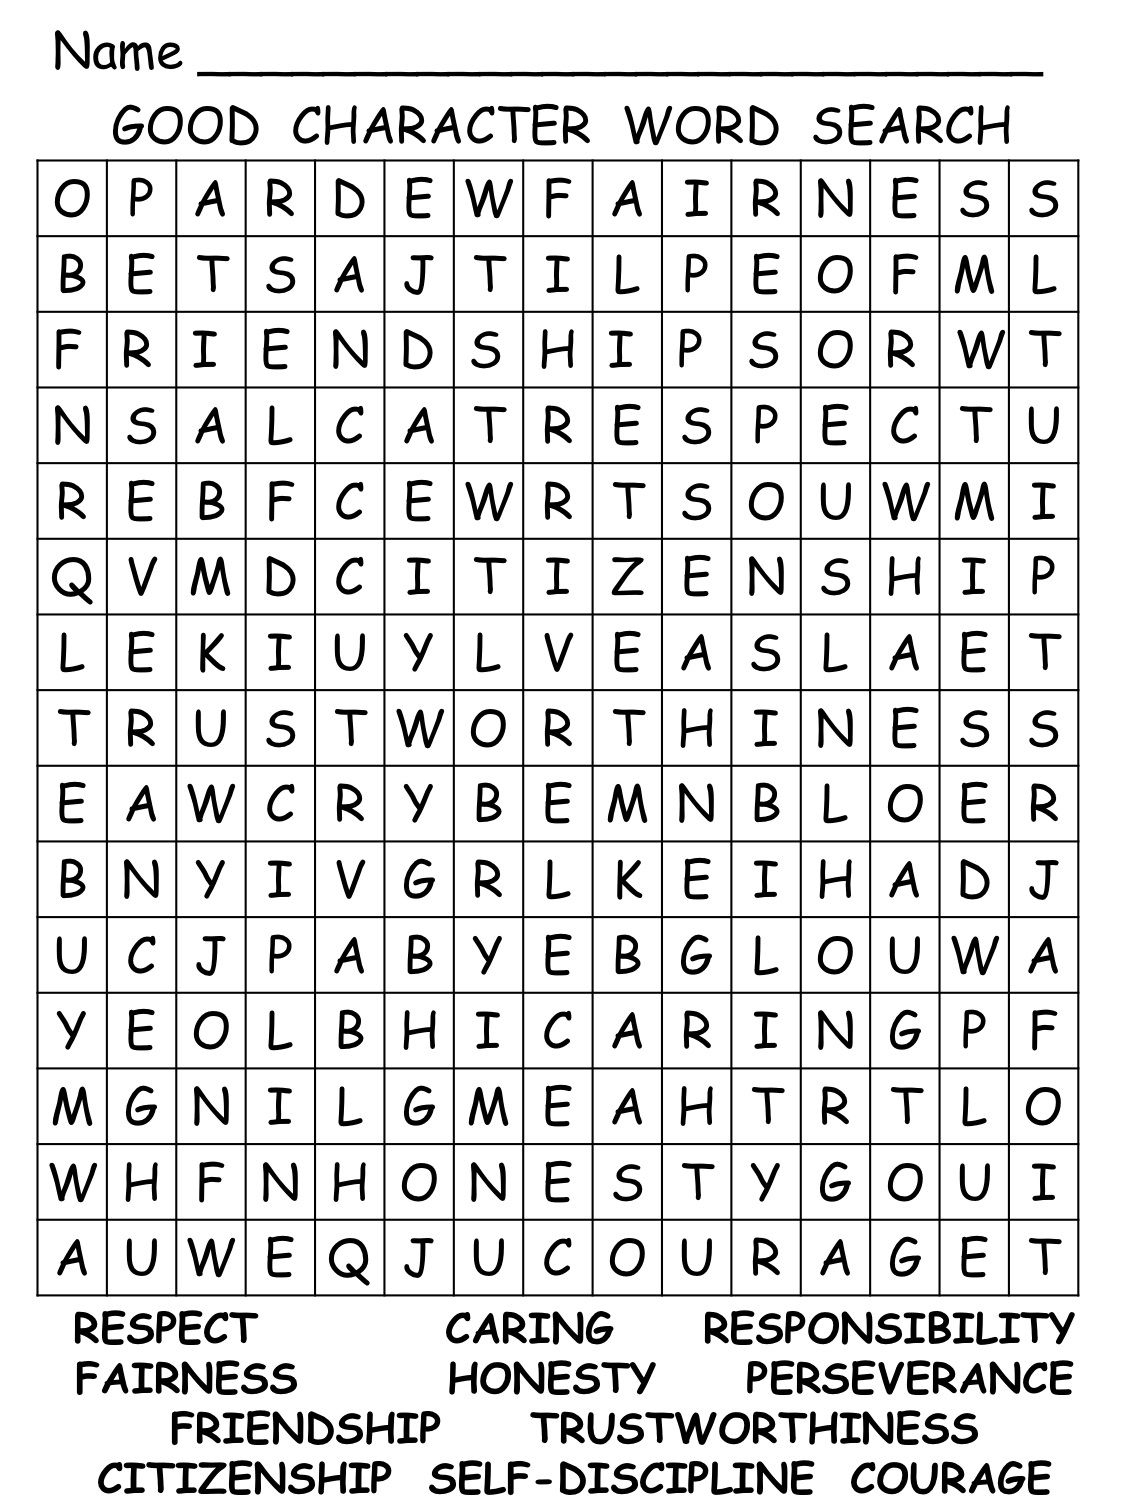 Good Character Word Search. Our Girl Scout Troop : Girl